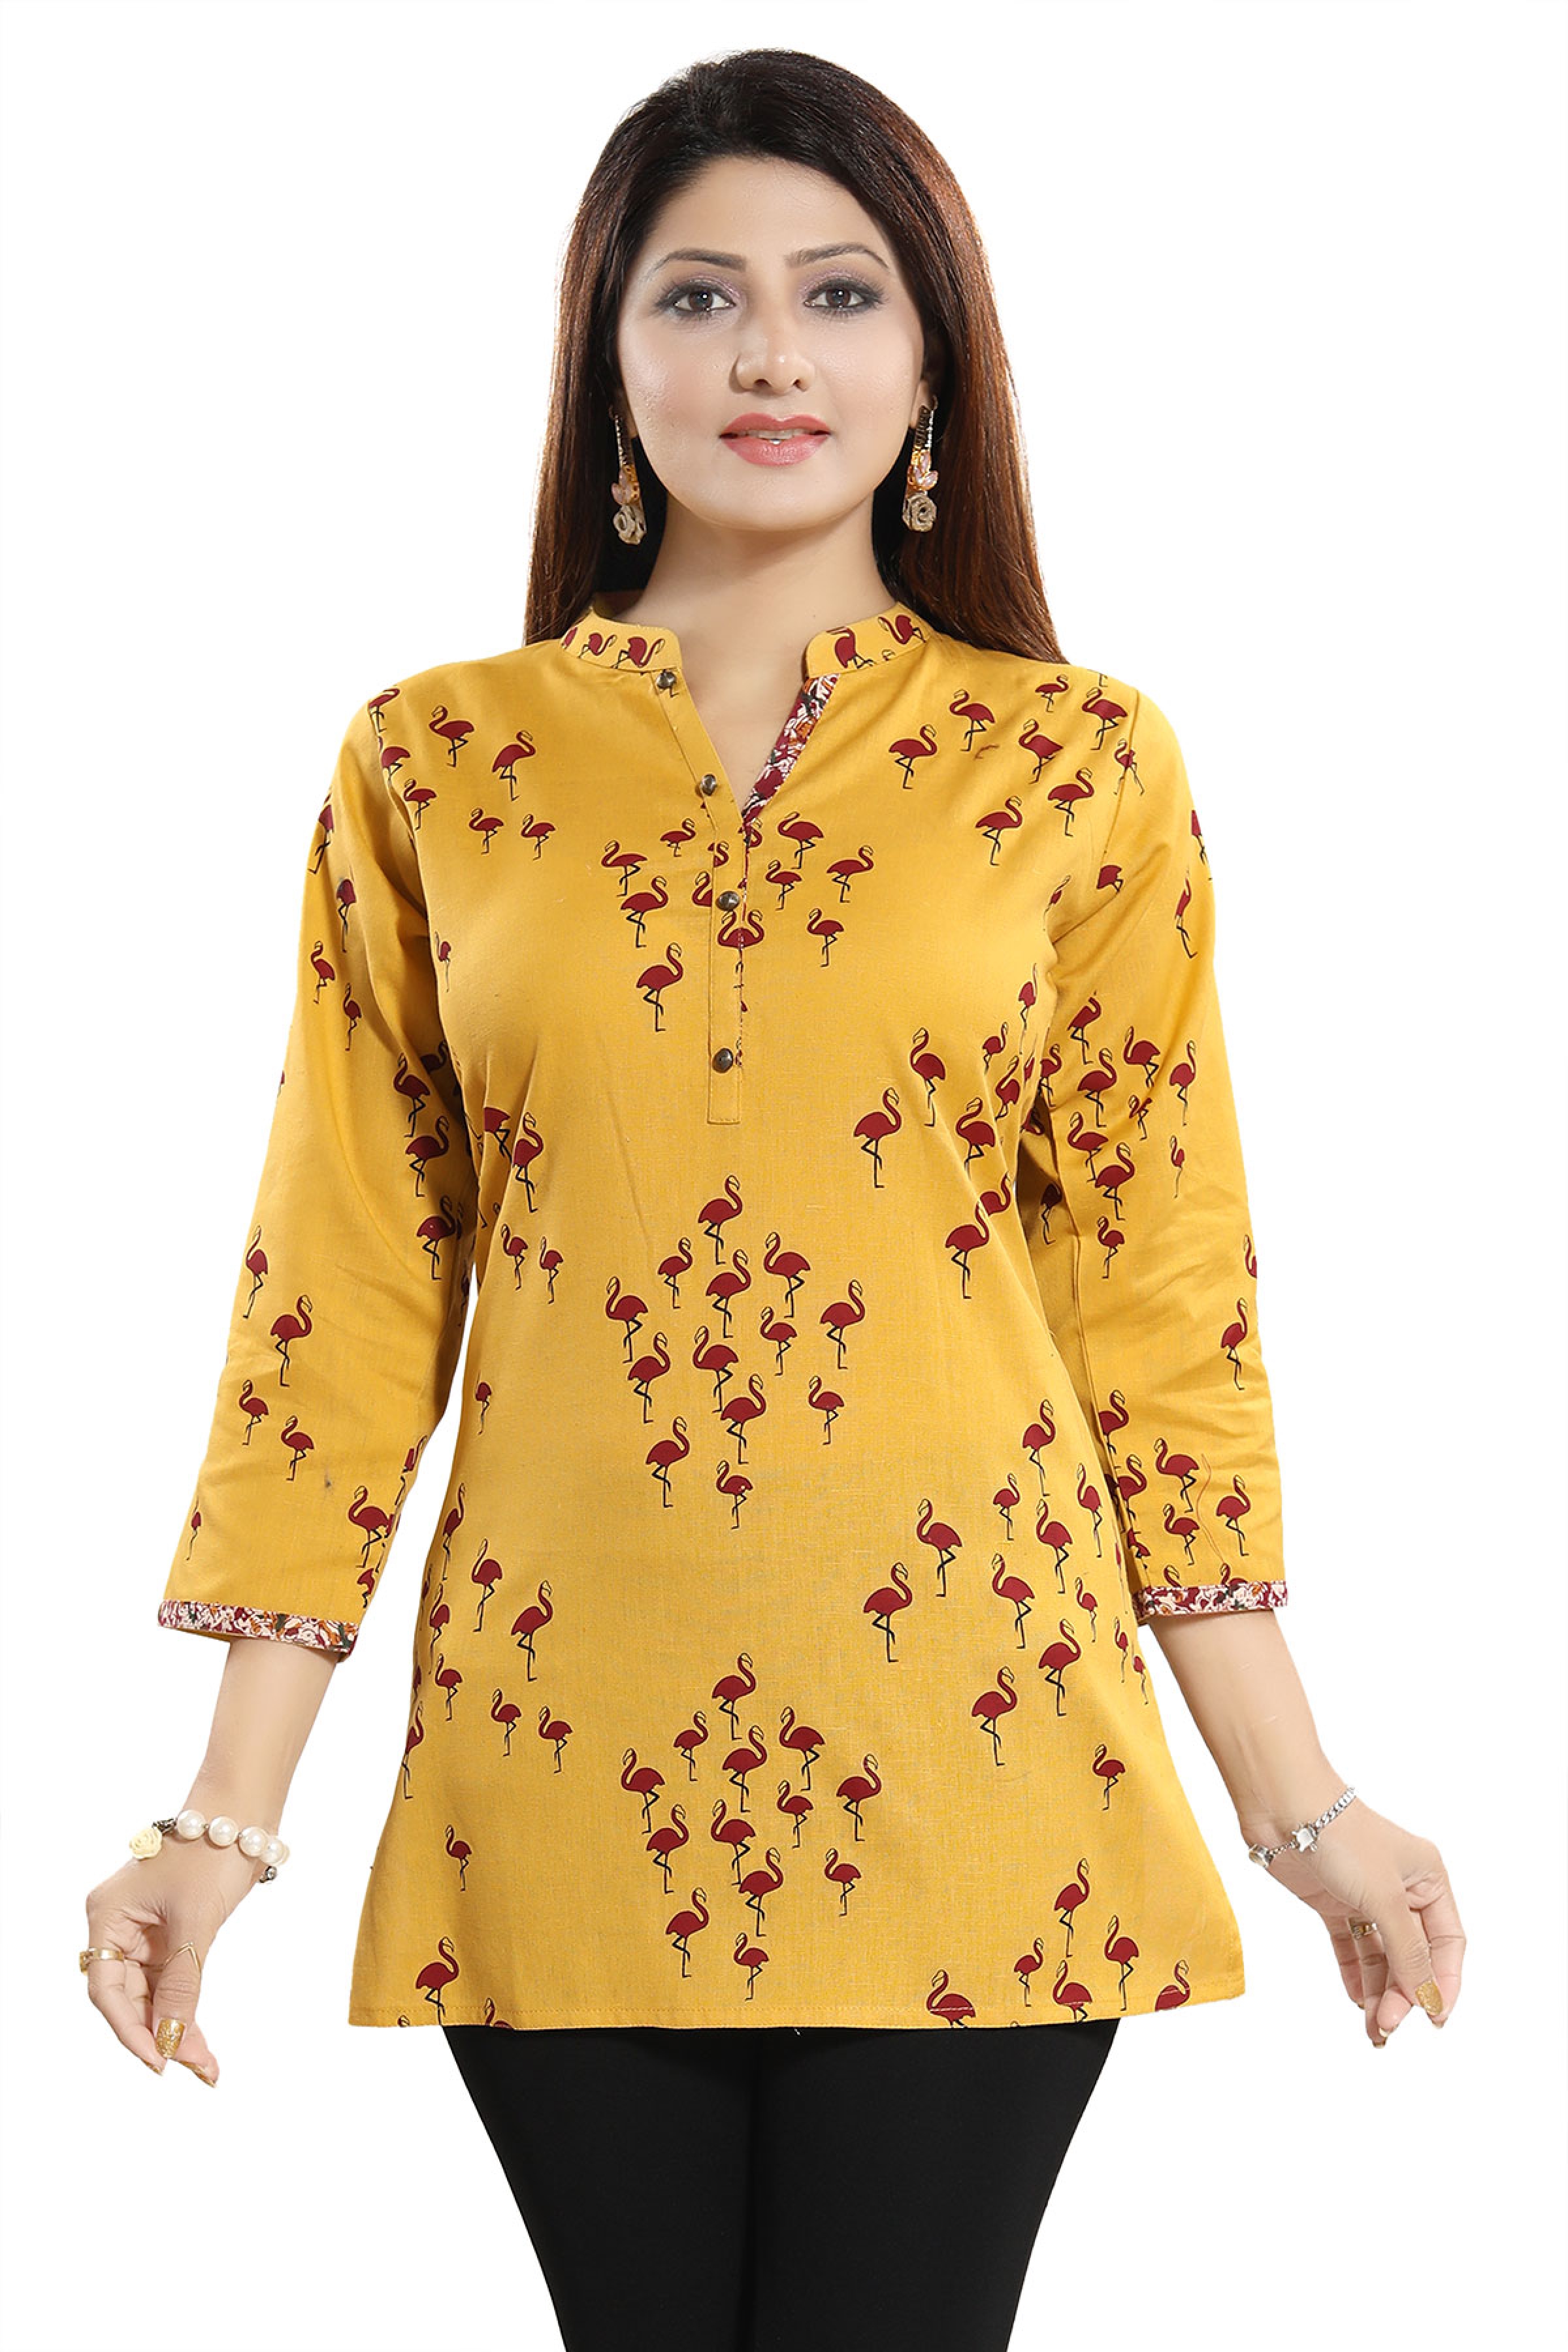 Funky Freeze Yellow Cotton Printed Short Tunic Top for Casual Wear